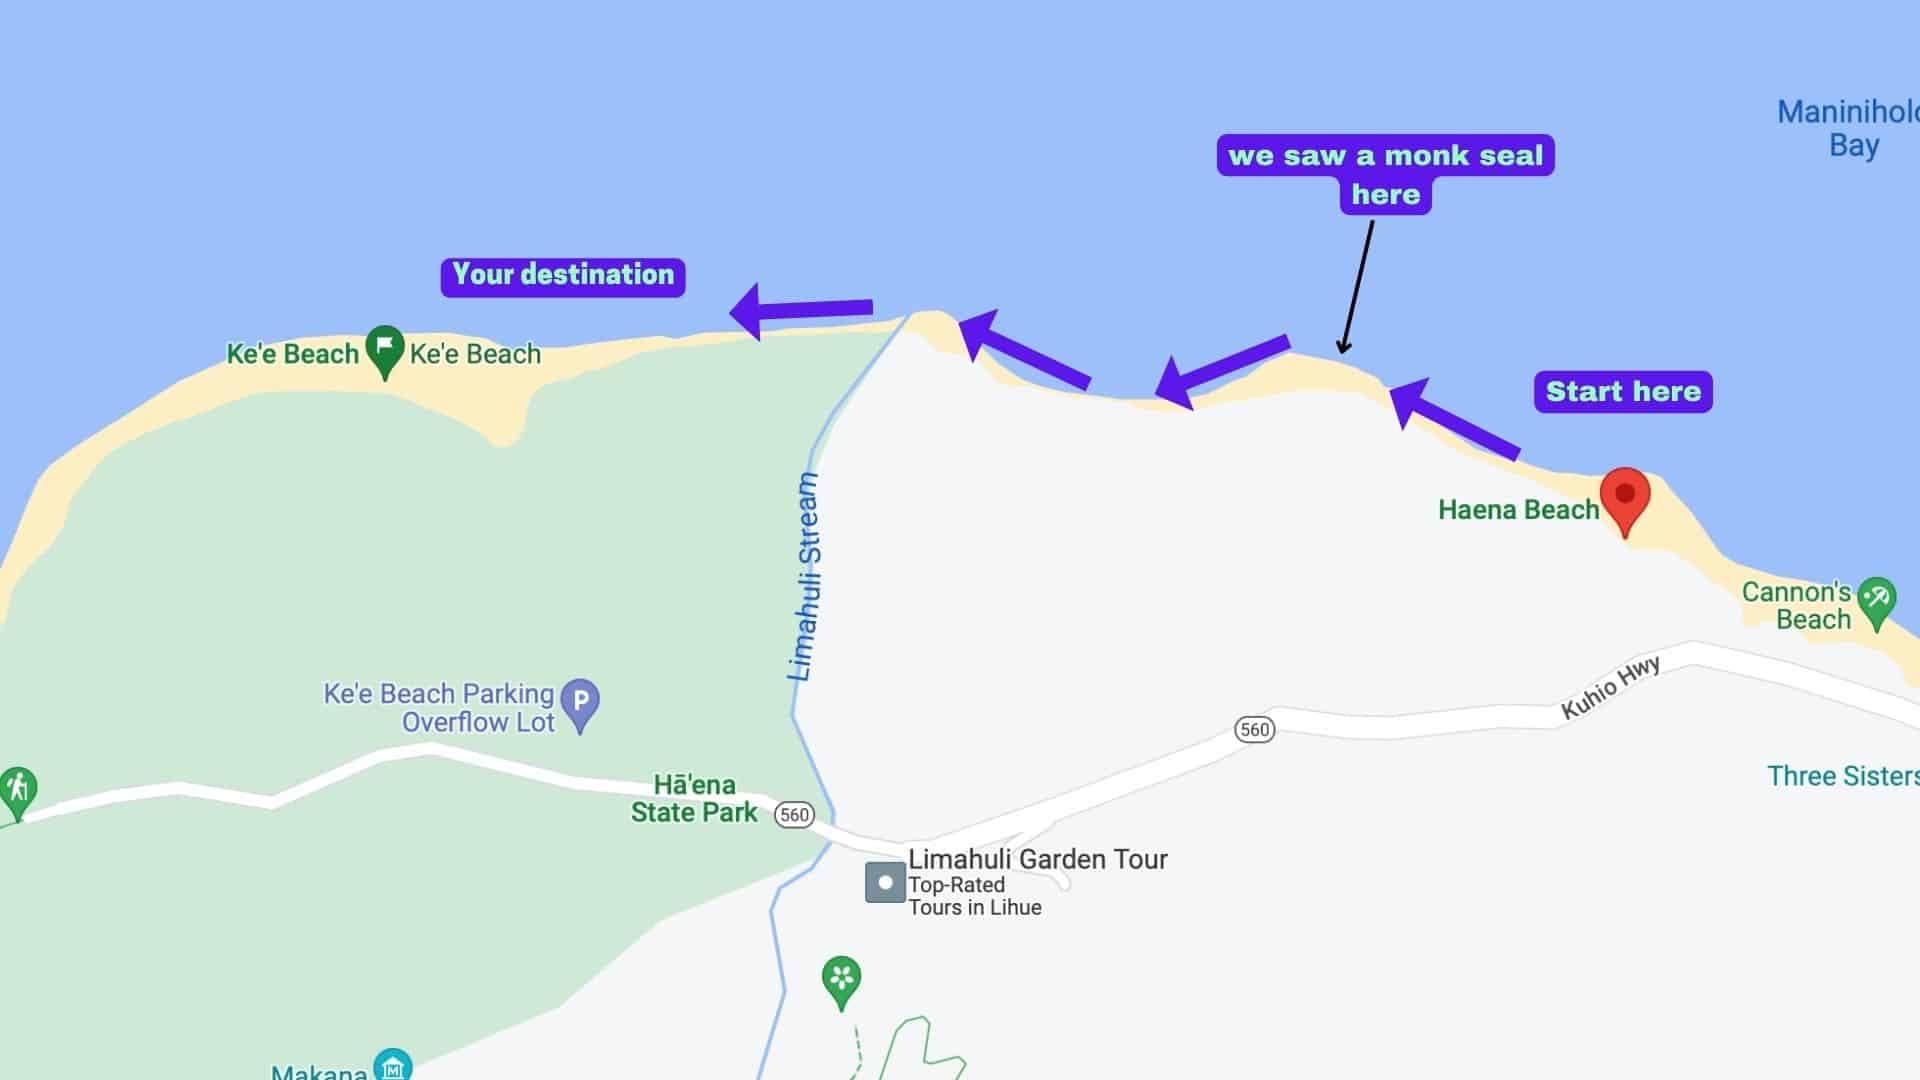 How to get to kee beach in Kauai without reservation